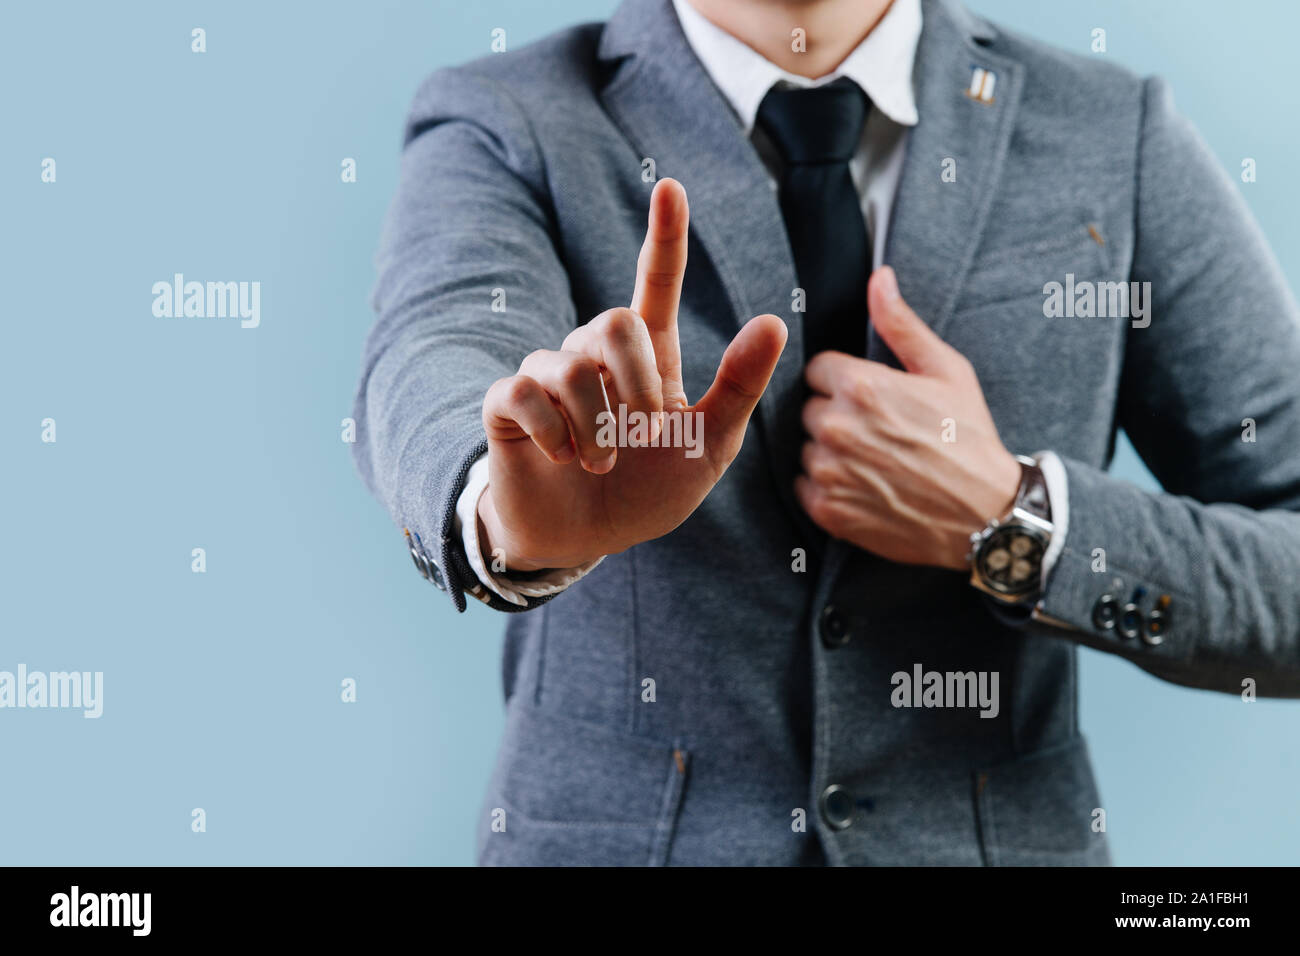 Businessman in suit making objection gesture , holding index finger up over blue Stock Photo